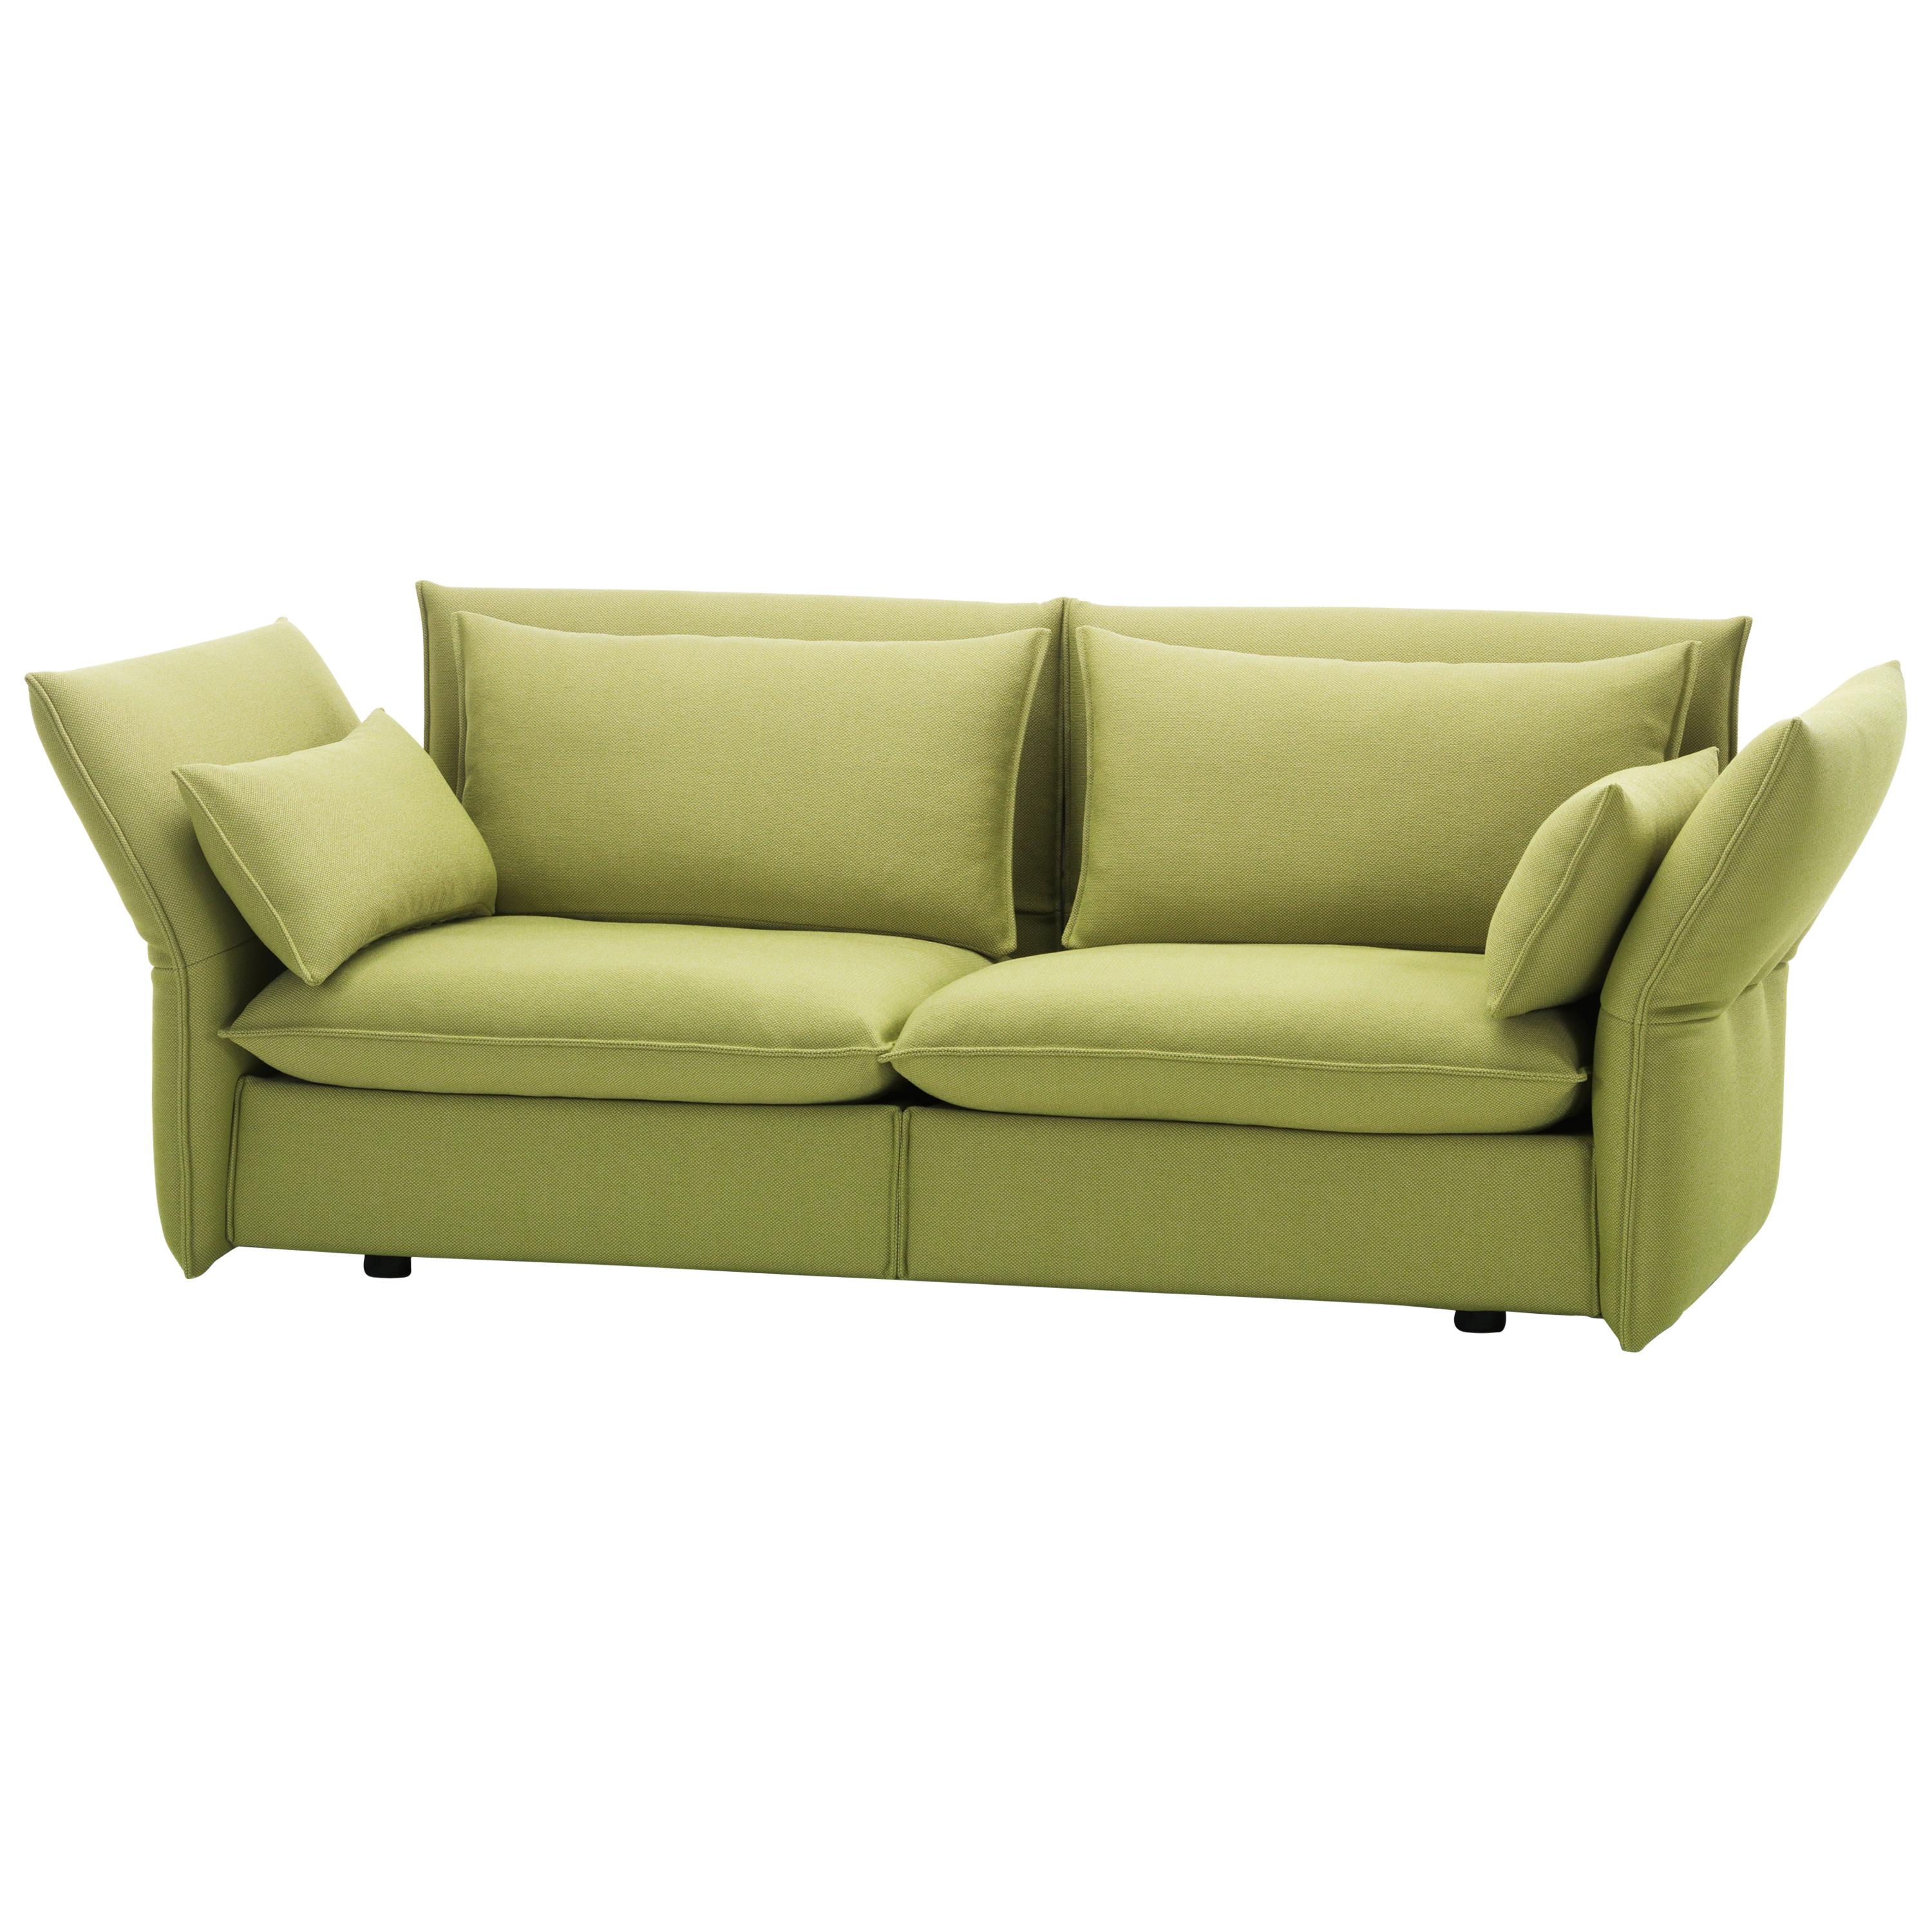 Vitra Mariposa 2 1/2-Seat Sofa in Sand Avocado by Edward Barber & Jay Osgerby For Sale